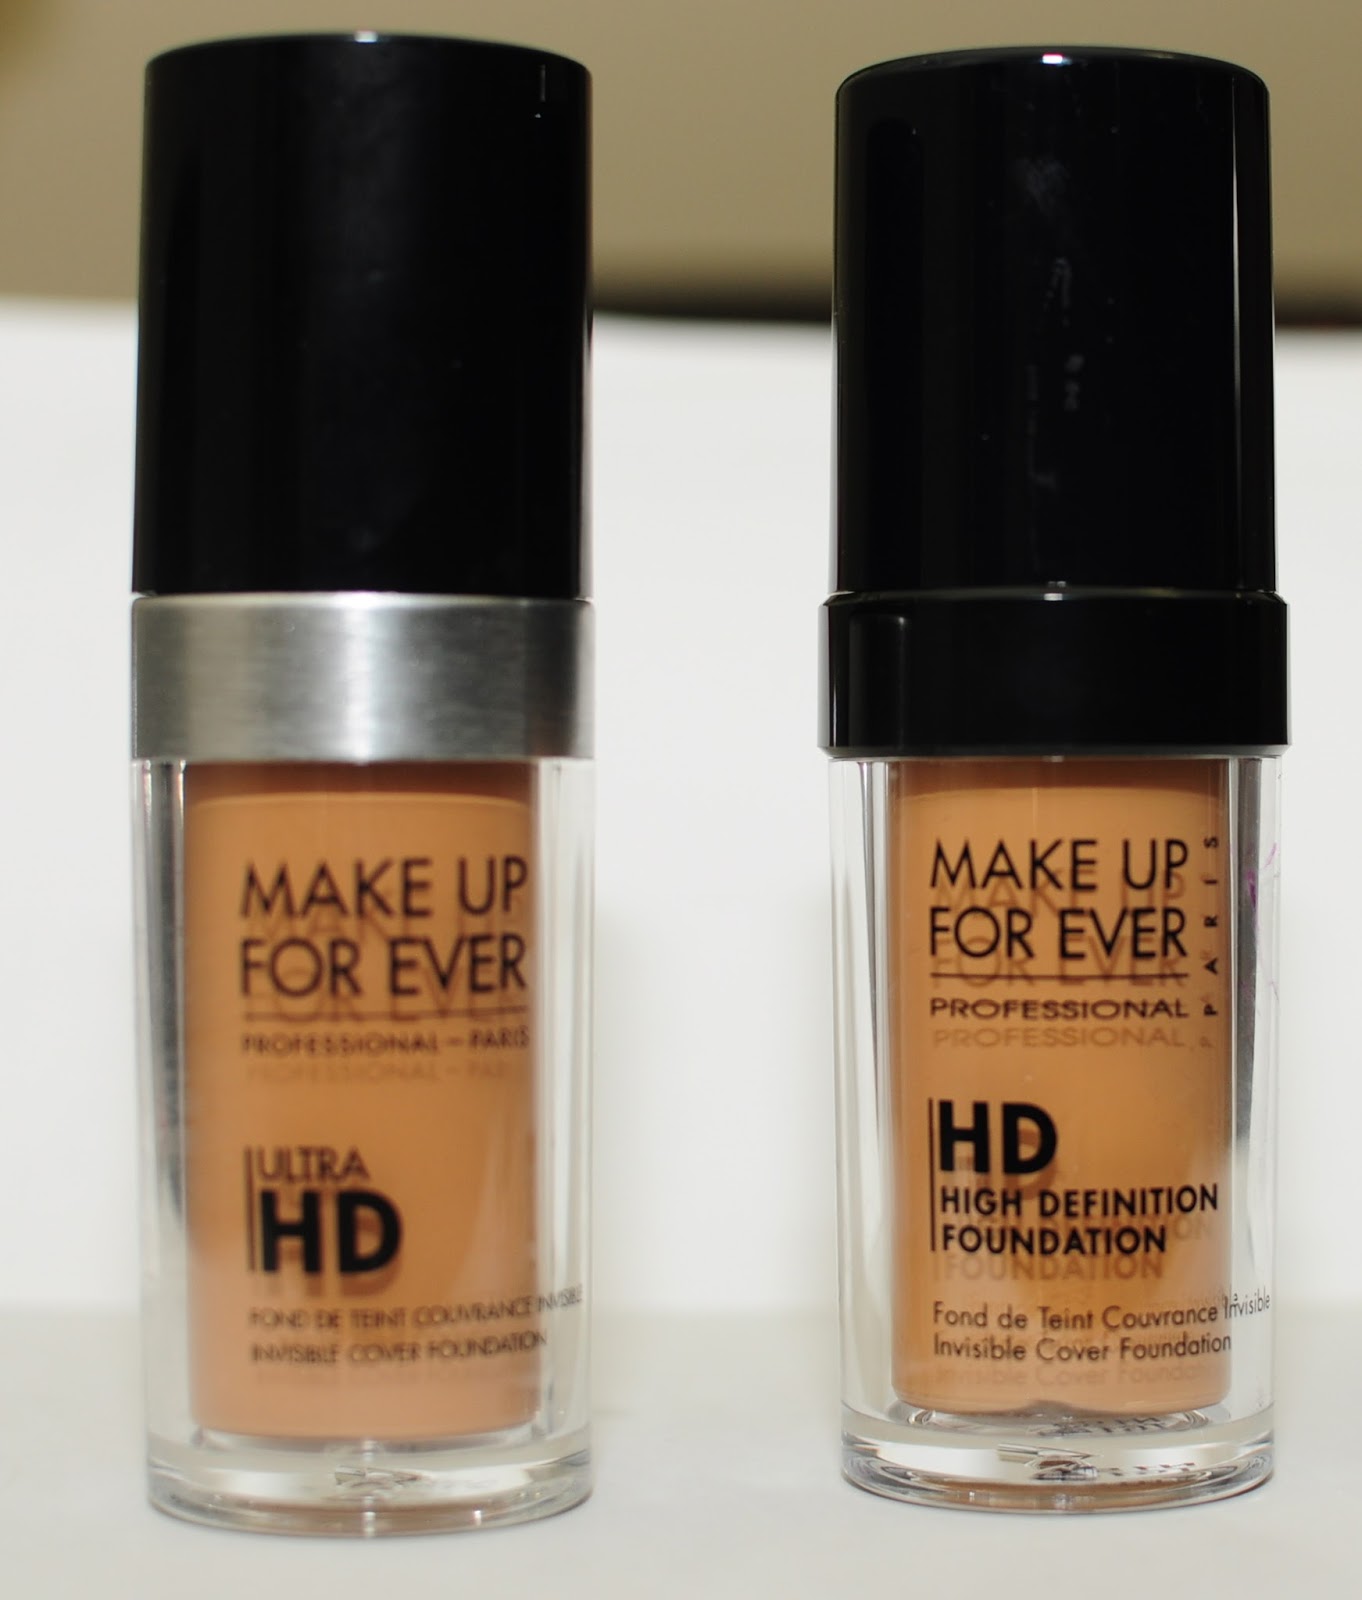 Make up for ever hd foundation reviews 14